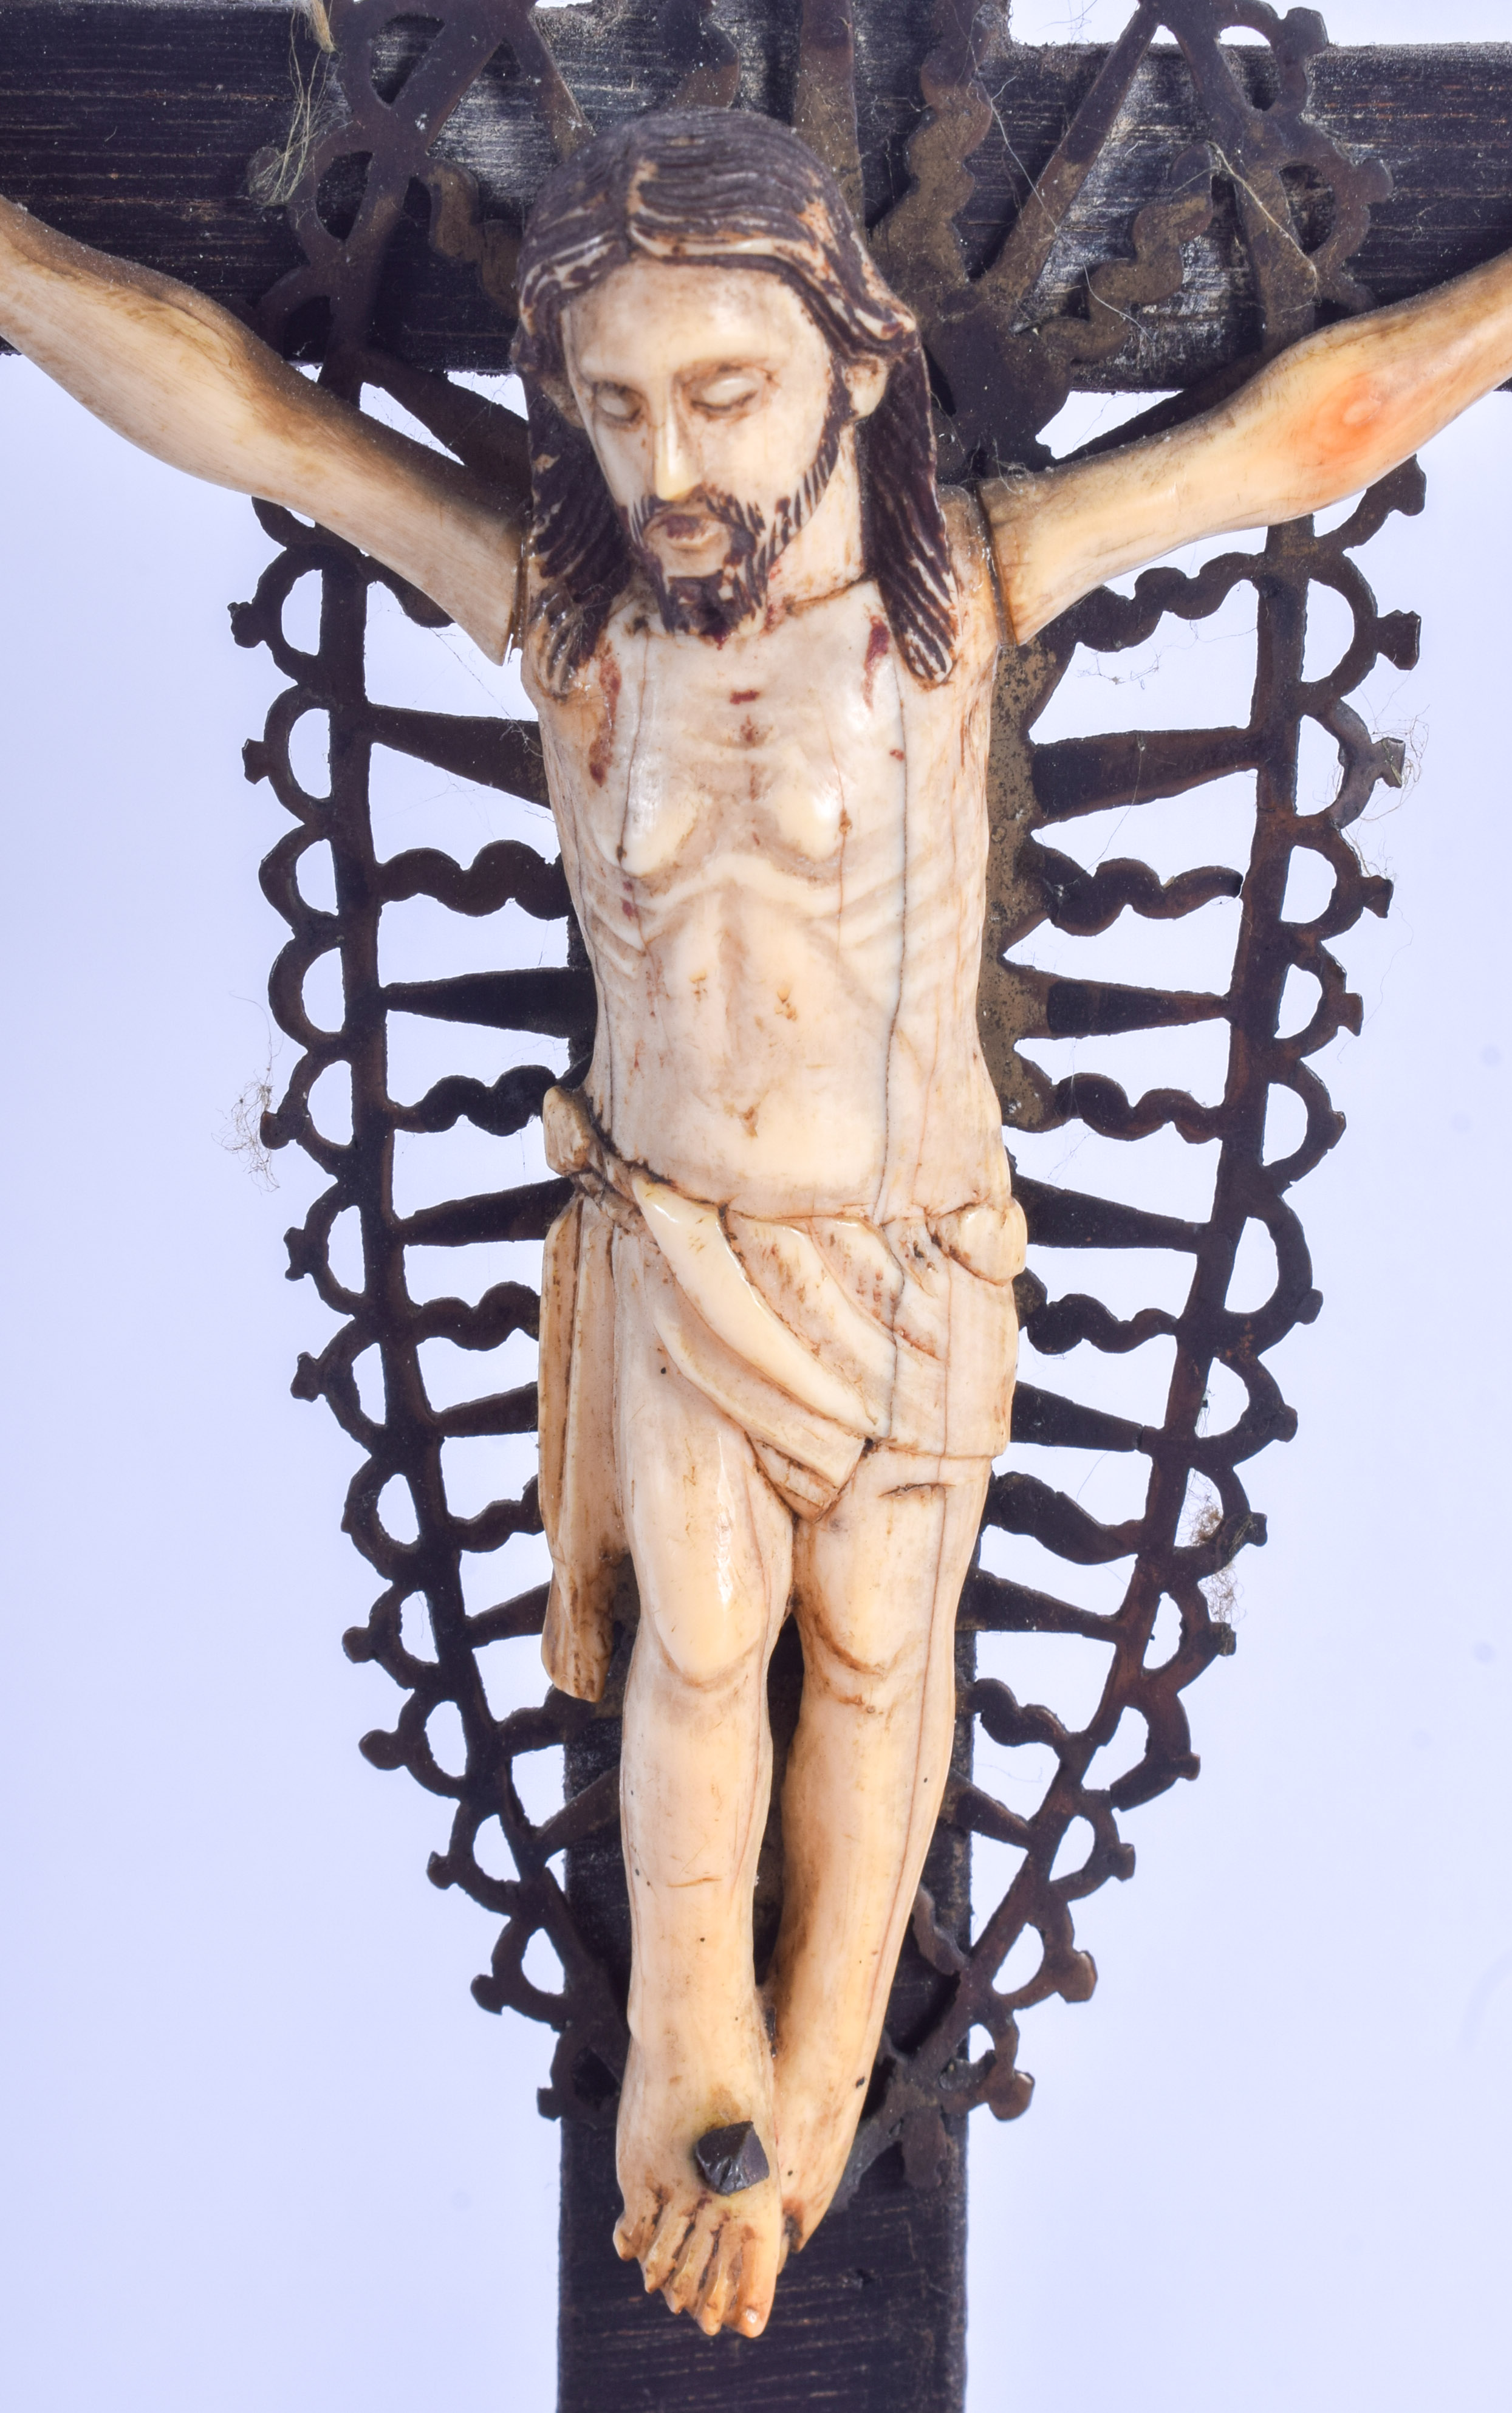 AN 18TH CENTURY INDO PORTUGUESE CARVED IVORY CRUCIFIX modelled upon the cross. Ivory 13 cm x 11 cm. - Image 2 of 3